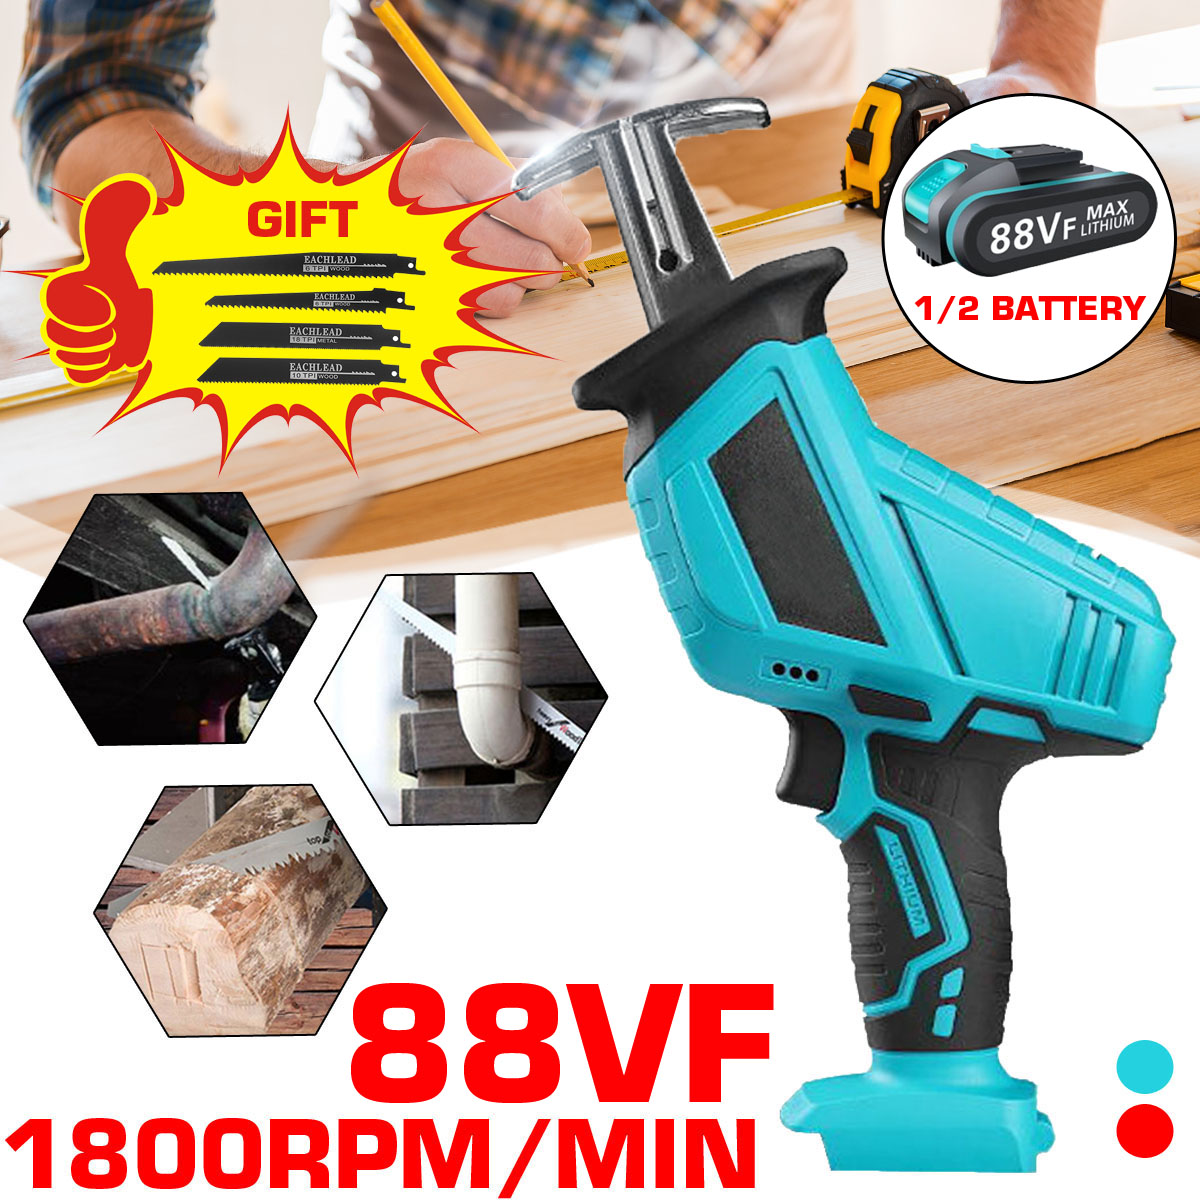 21V-Coedless-Handheld-Electric-Reciprocating-Saw-Variable-Speed-Electric-Saw-with-4xSaw-Blades-Tools-1724901-2